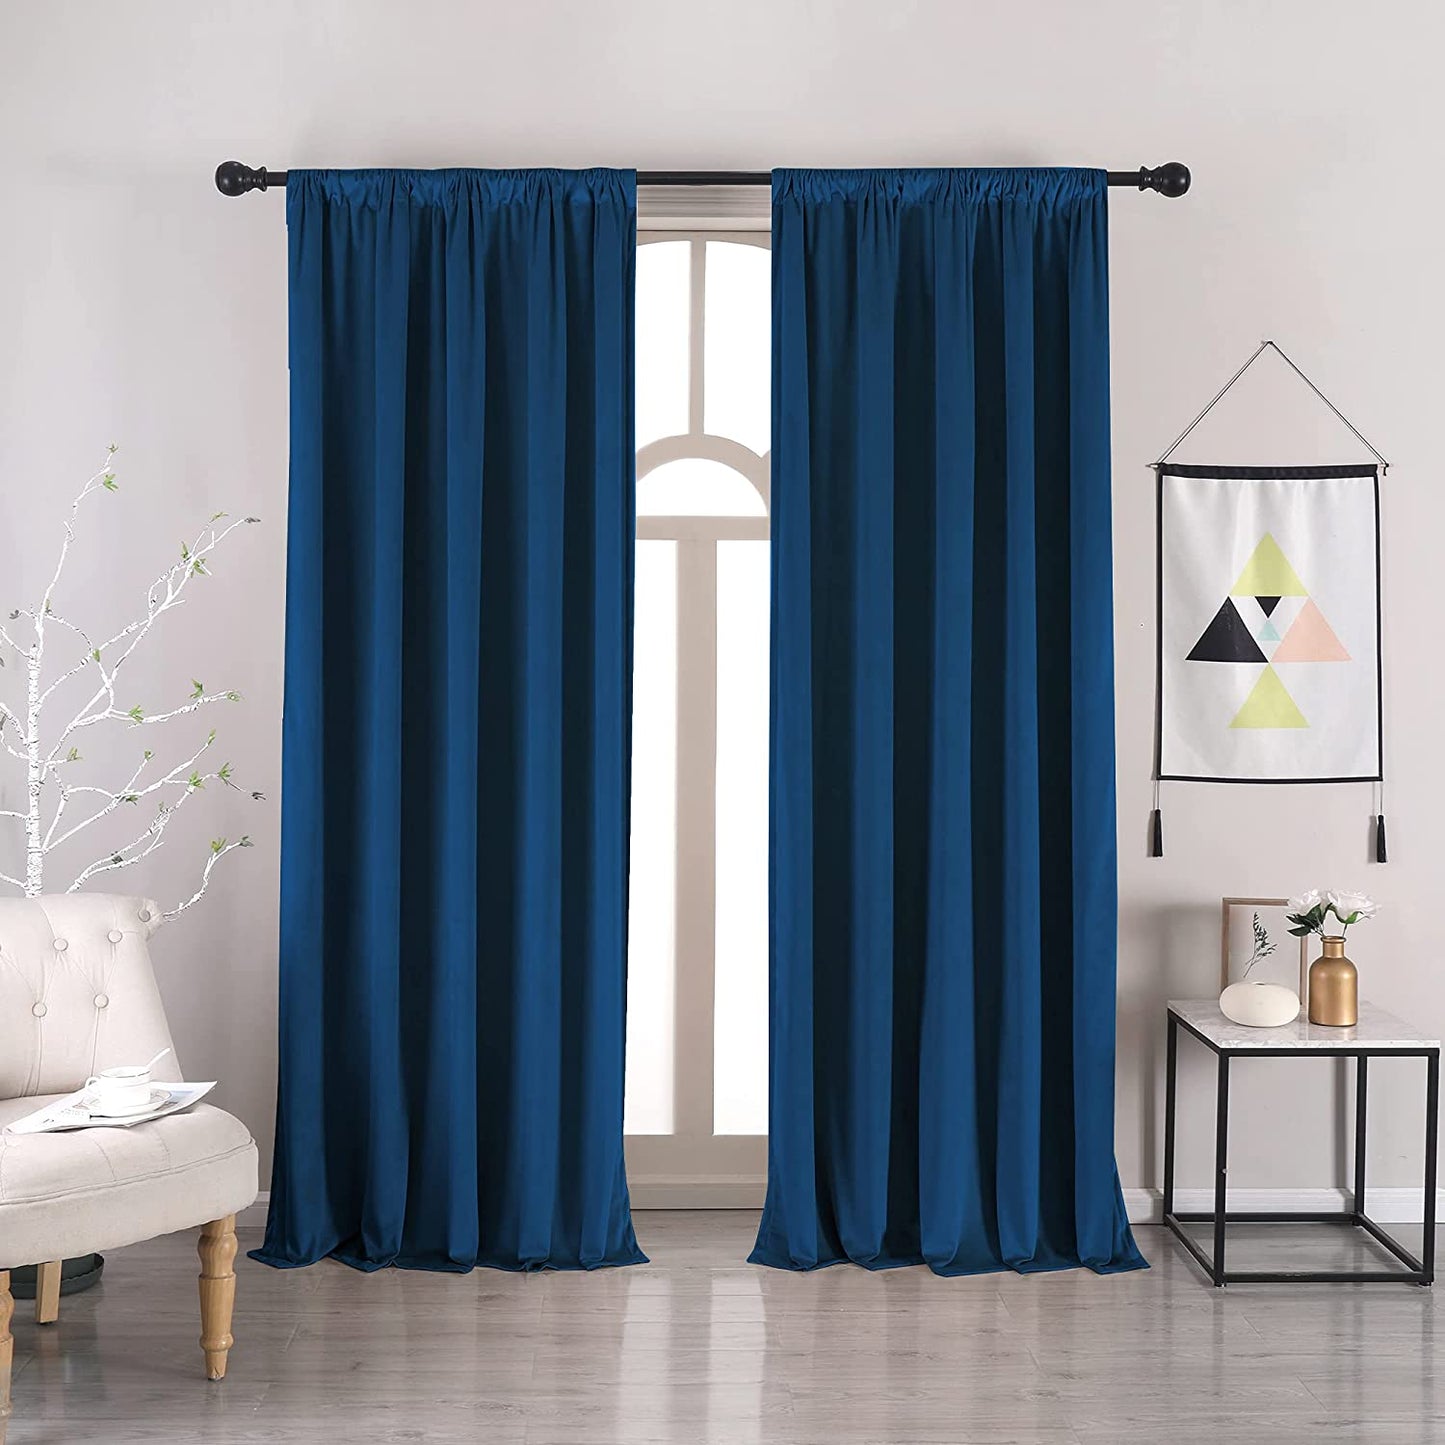 Nanbowang Green Velvet Curtains 63 Inches Long Dark Green Light Blocking Rod Pocket Window Curtain Panels Set of 2 Heat Insulated Curtains Thermal Curtain Panels for Bedroom  nanbowang Navy Blue 52"X72" 